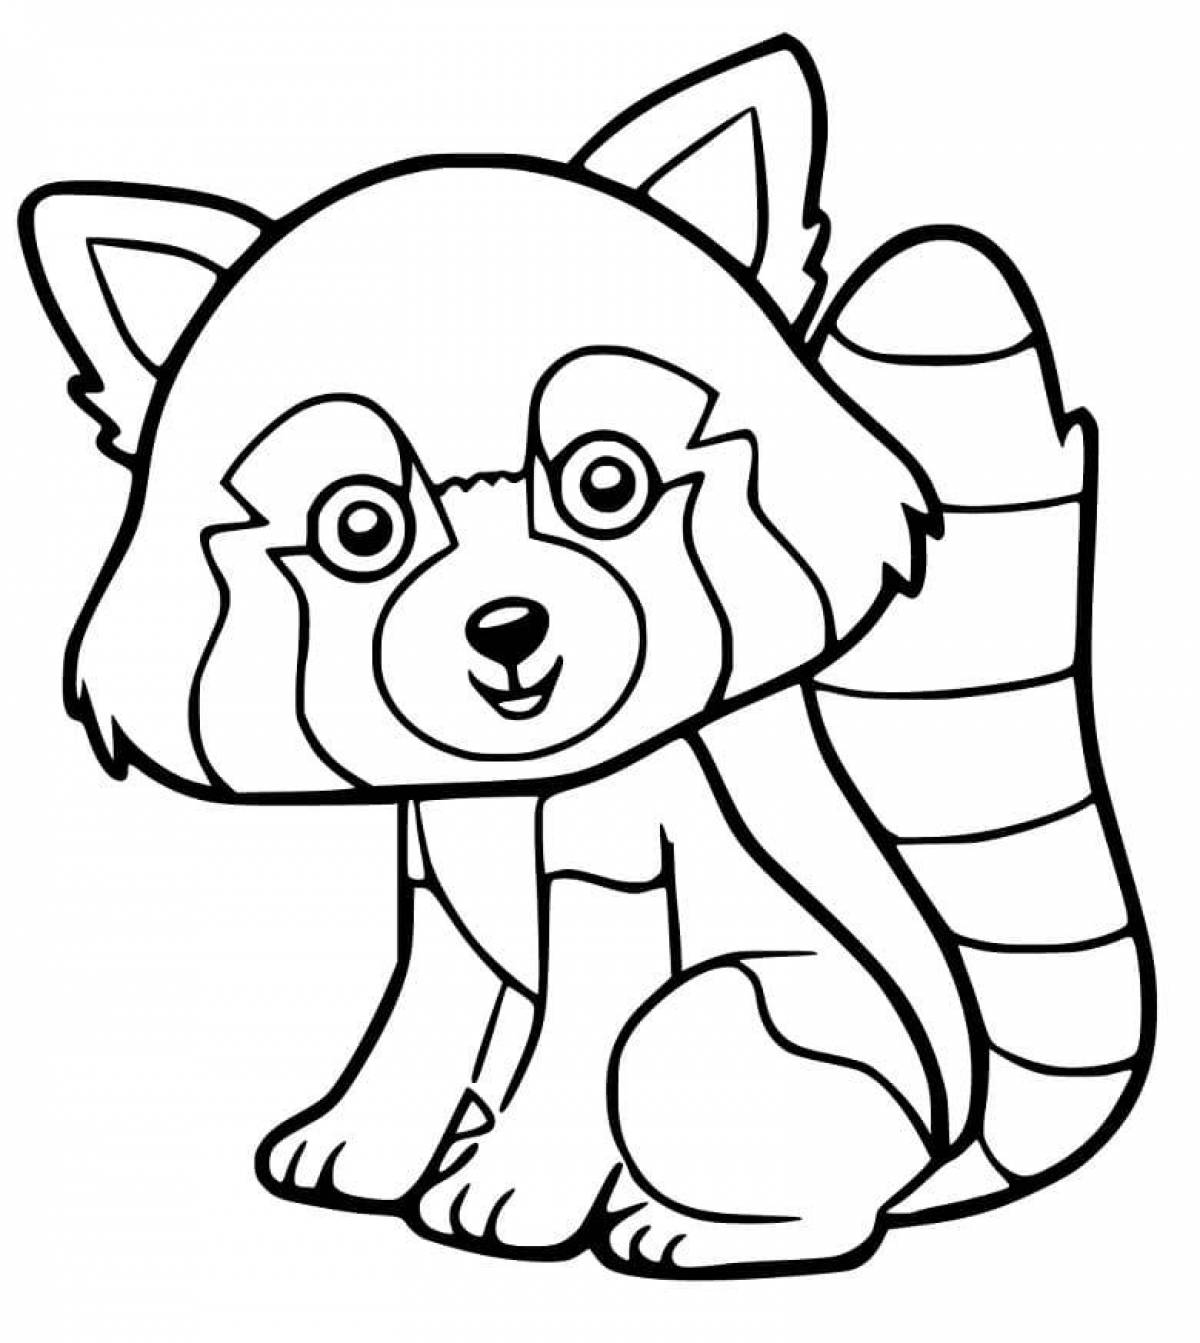 Mysterious red panda coloring page